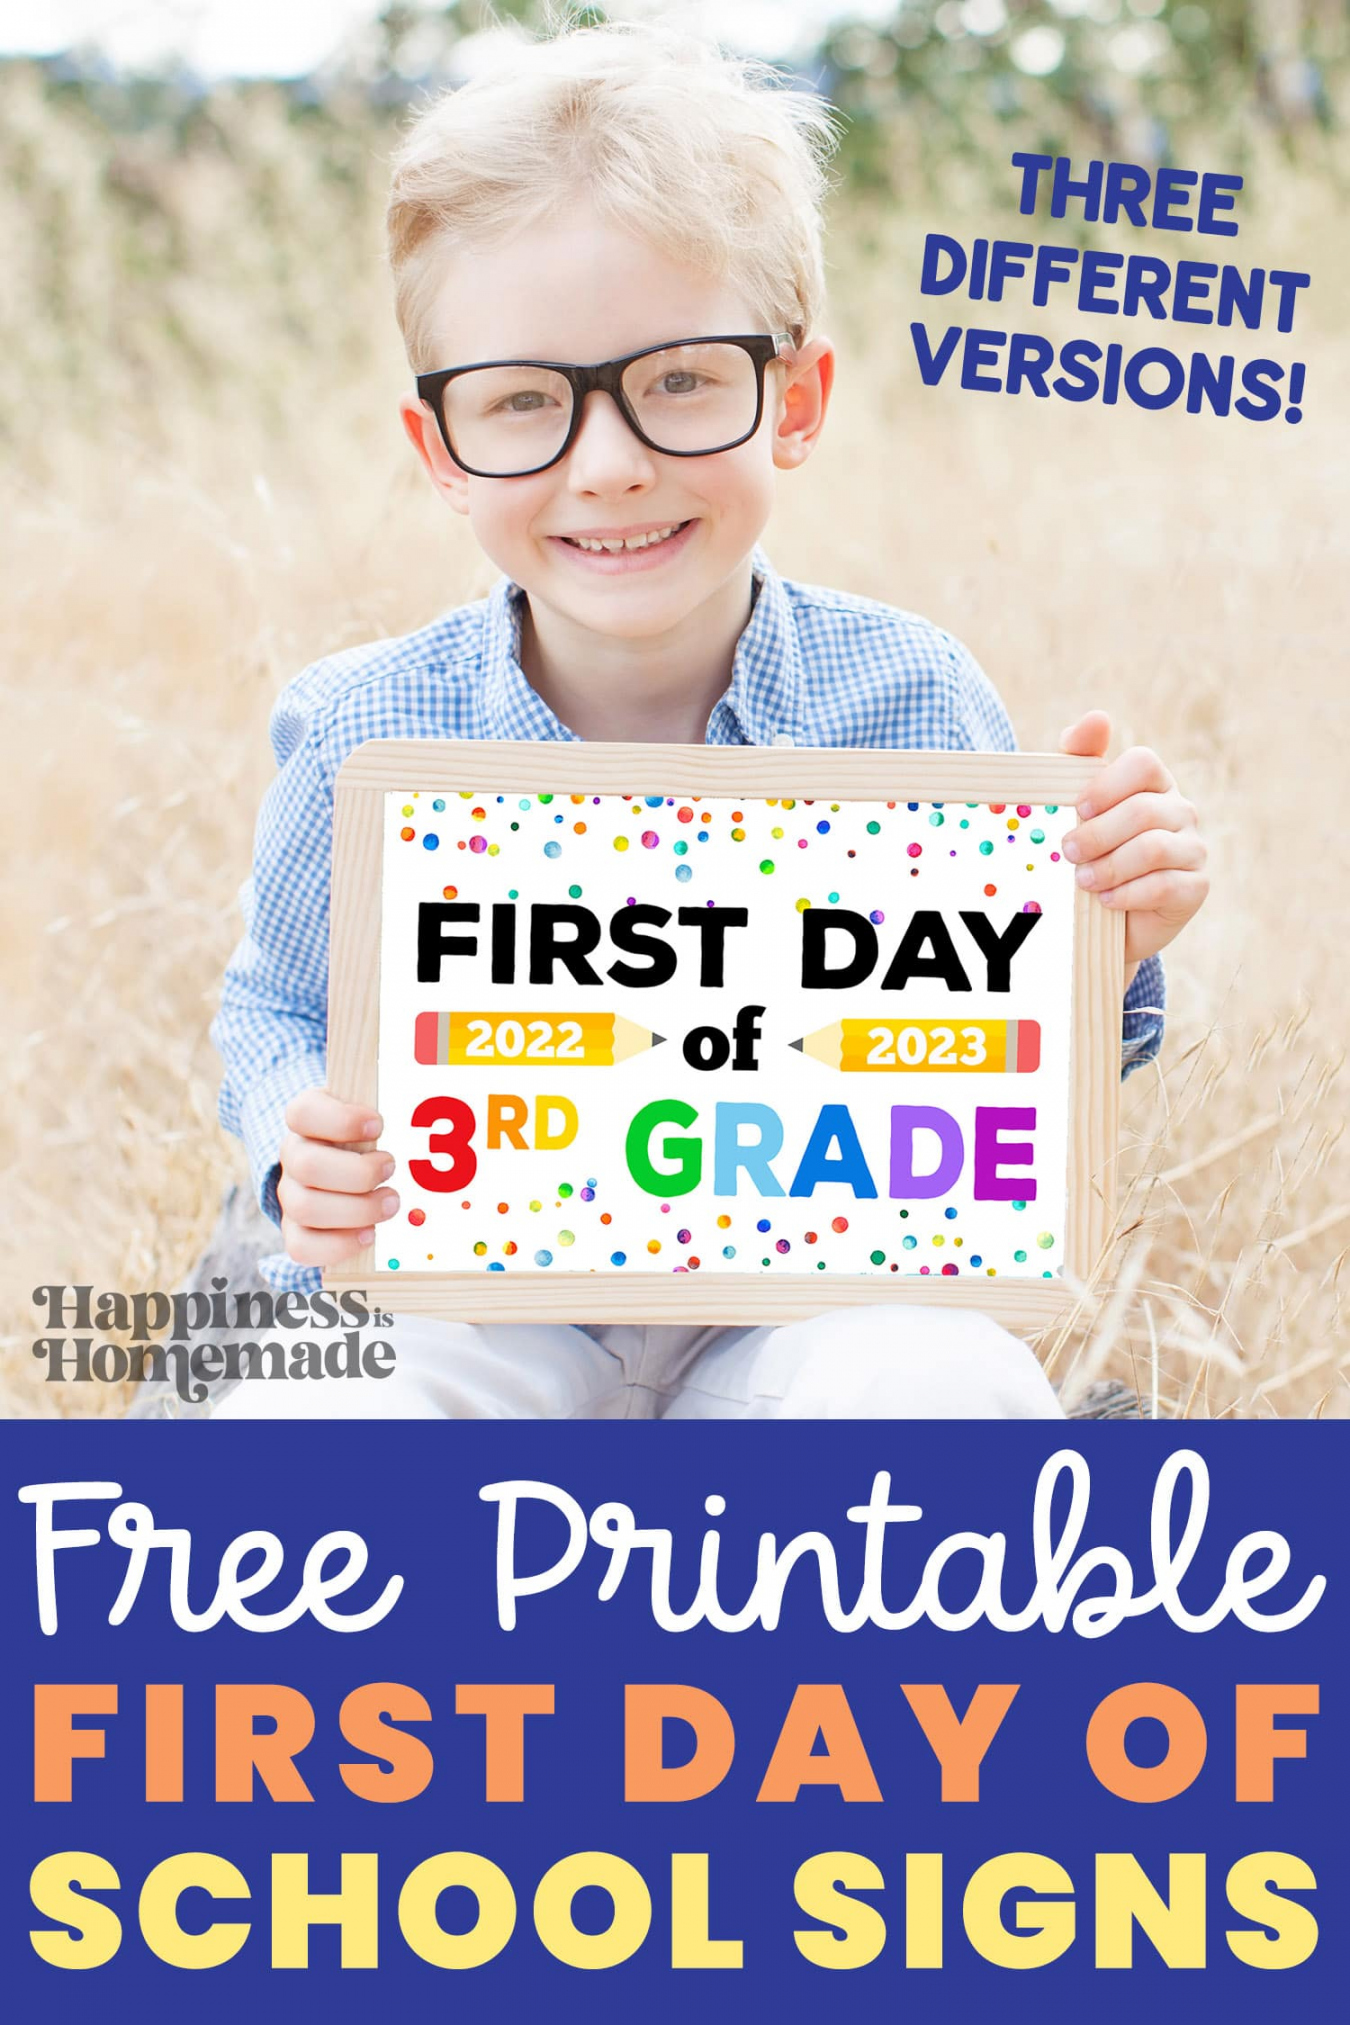 Free Printable First Day of School Signs - - Happiness is  - FREE Printables - Free Printable First Day Of Kindergarten Sign